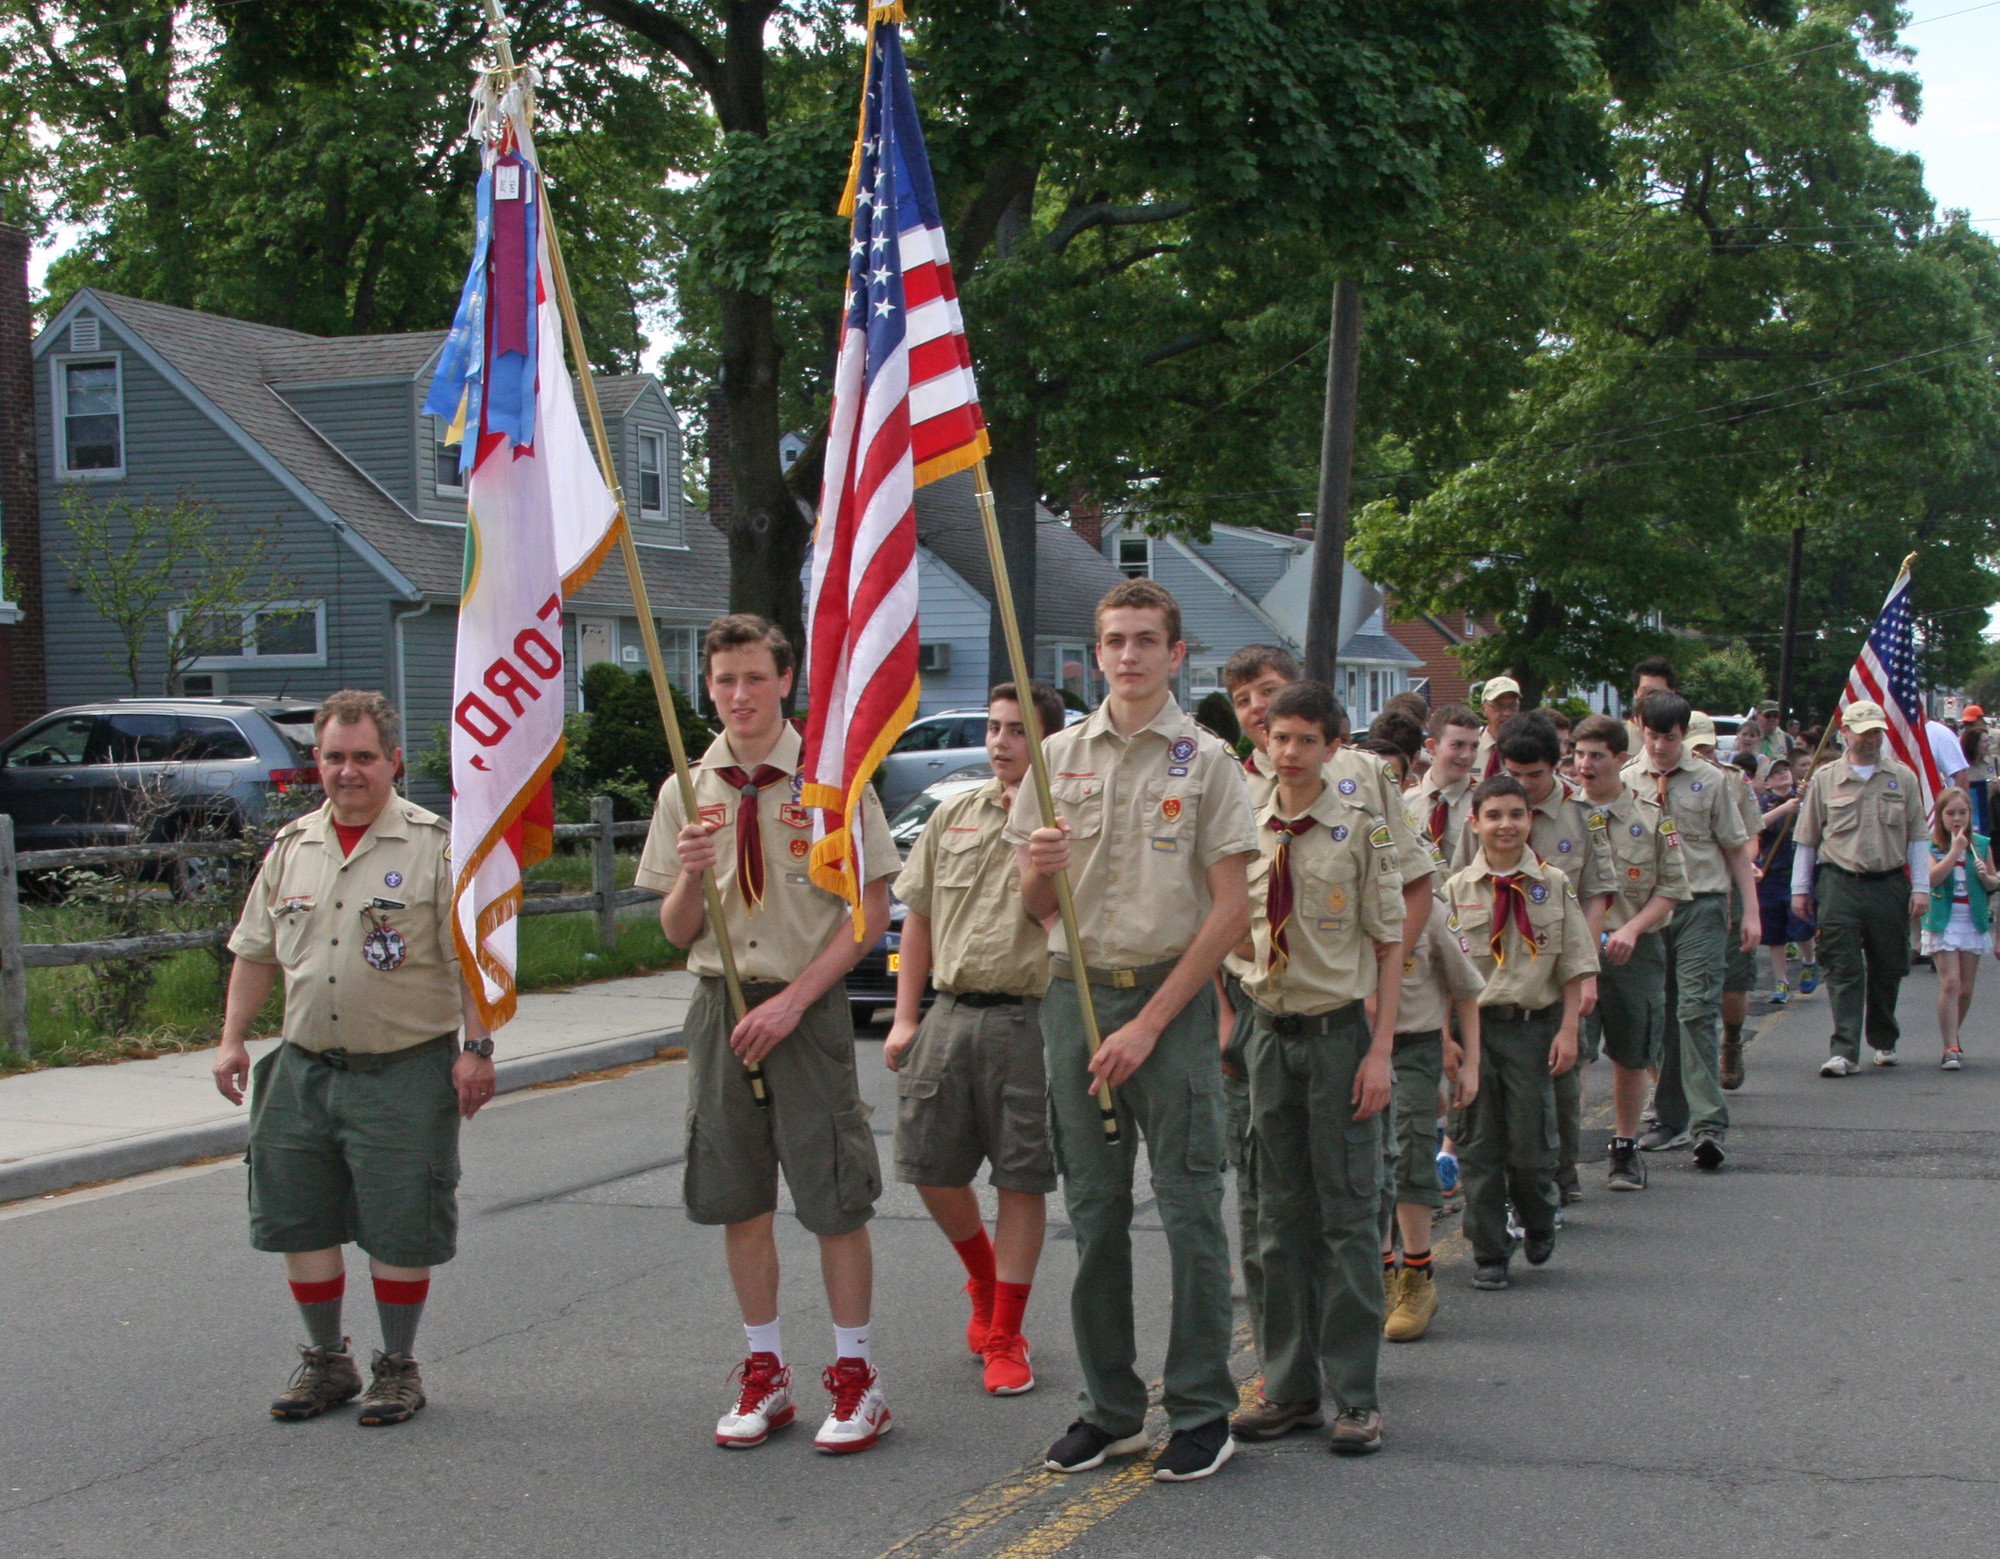 Members from Boy Scout Troop 239 marched.